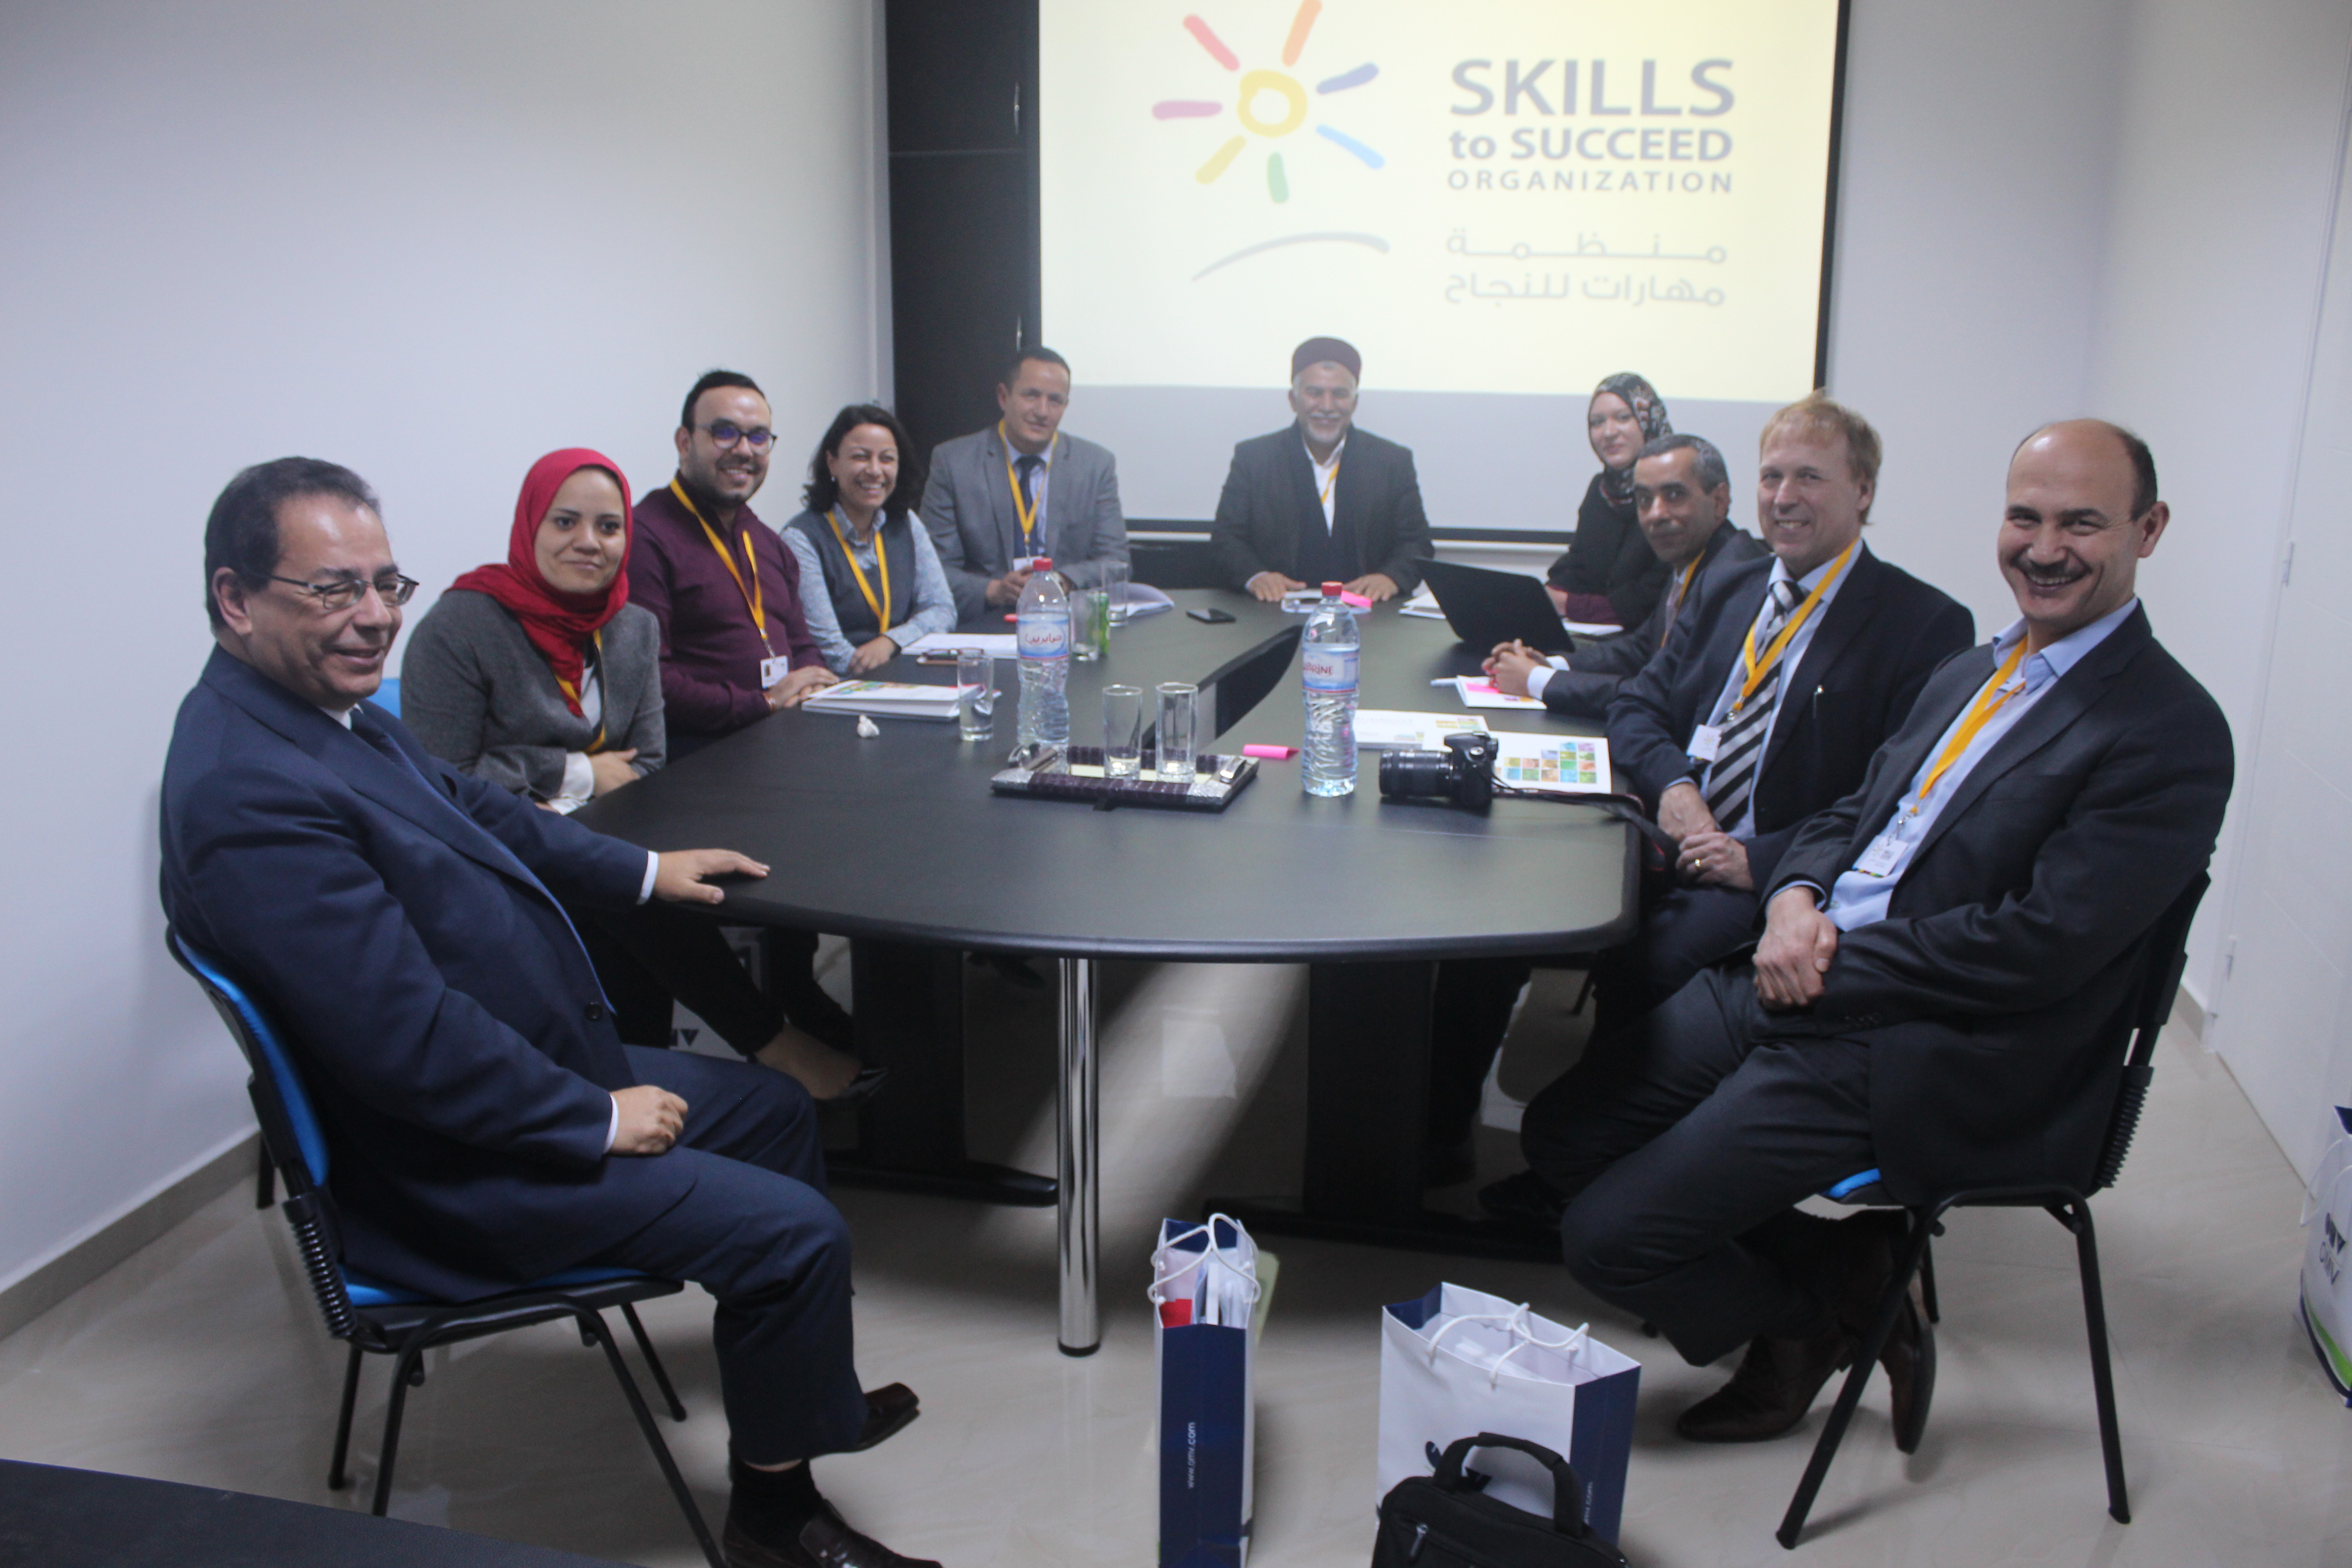 Official Inauguration of Skills to Succeed Organization : January 20 th 2018